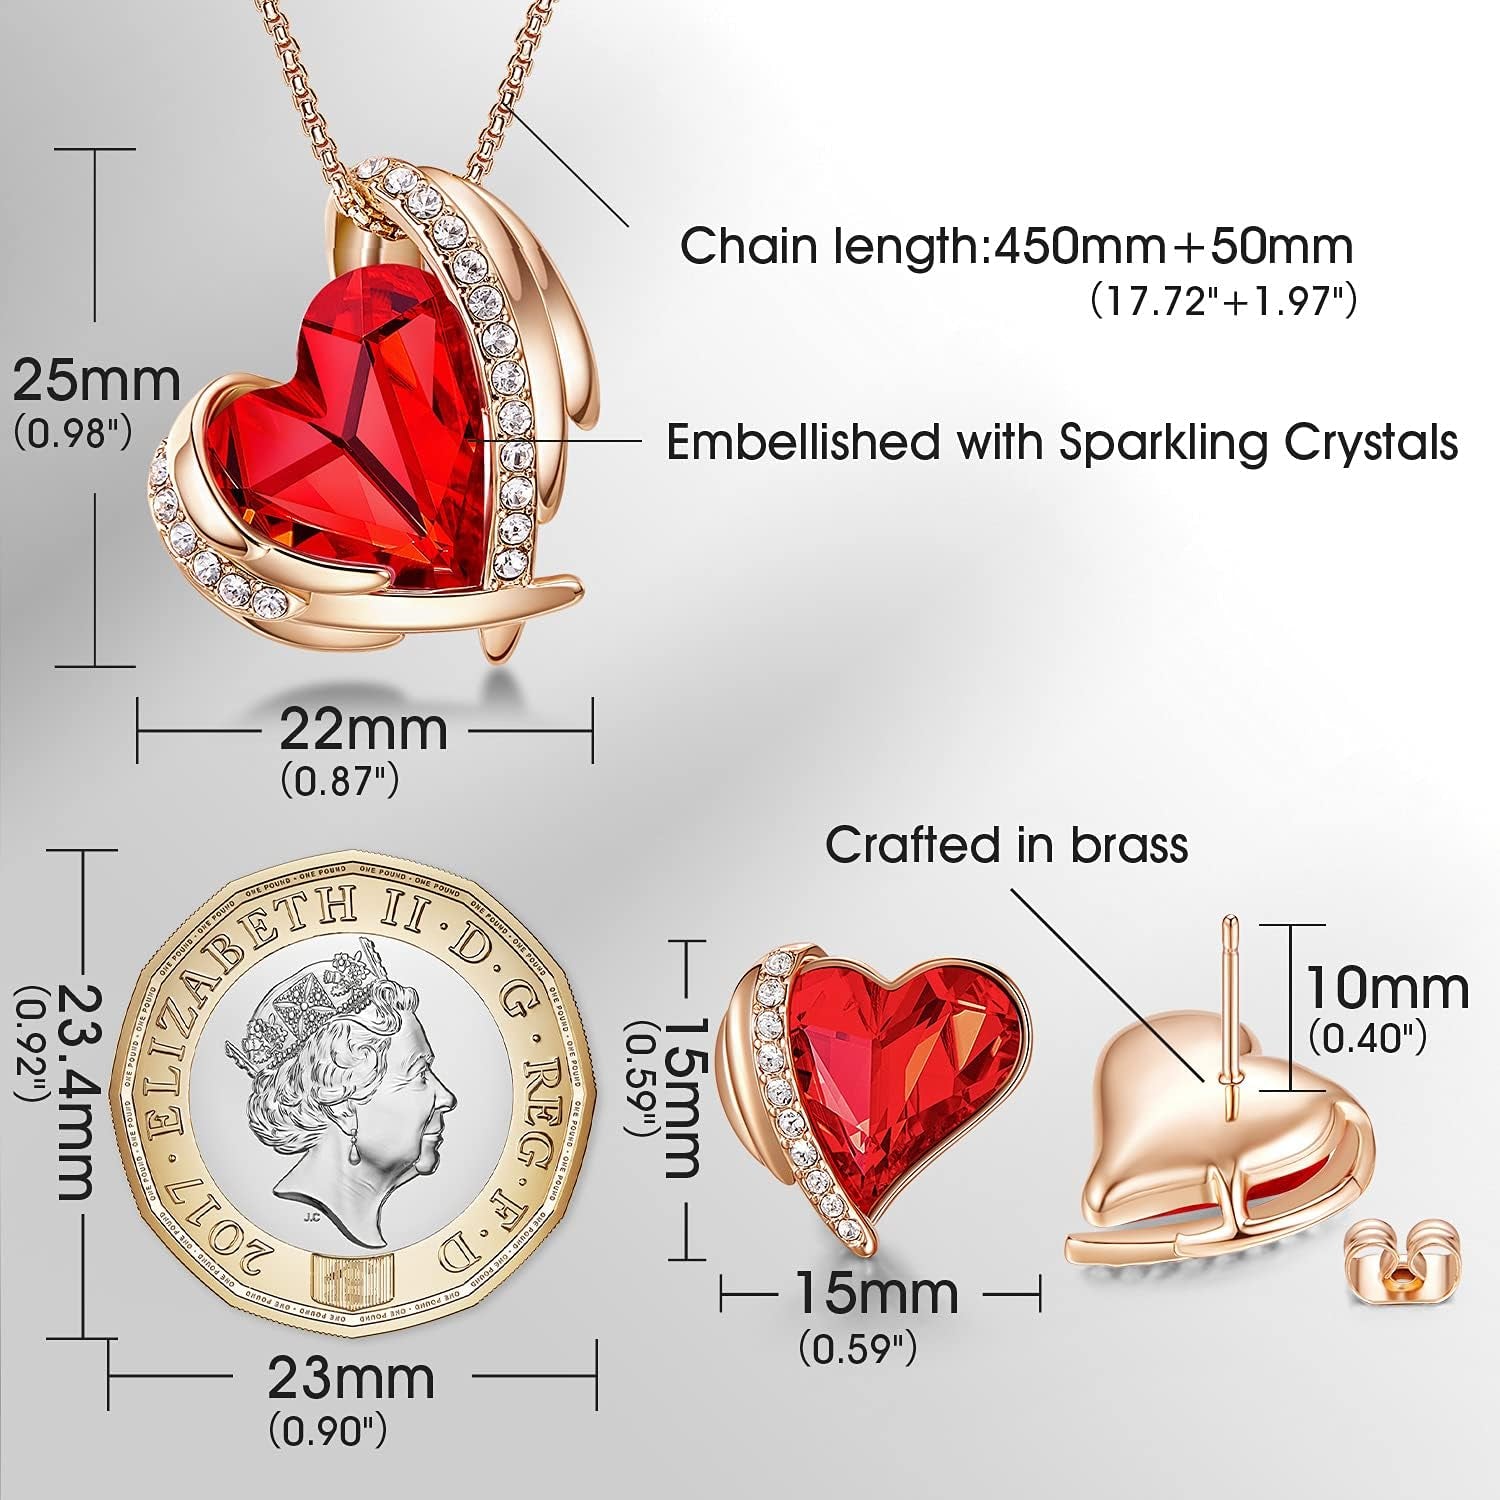 Jewellery Sets Gifts for Women Heart White/Rose Gold Necklaces and Earrings Set Valentines Christmas Anniversary Birthday Mother'S Day Jewelry Gifts for Mum Her Wife